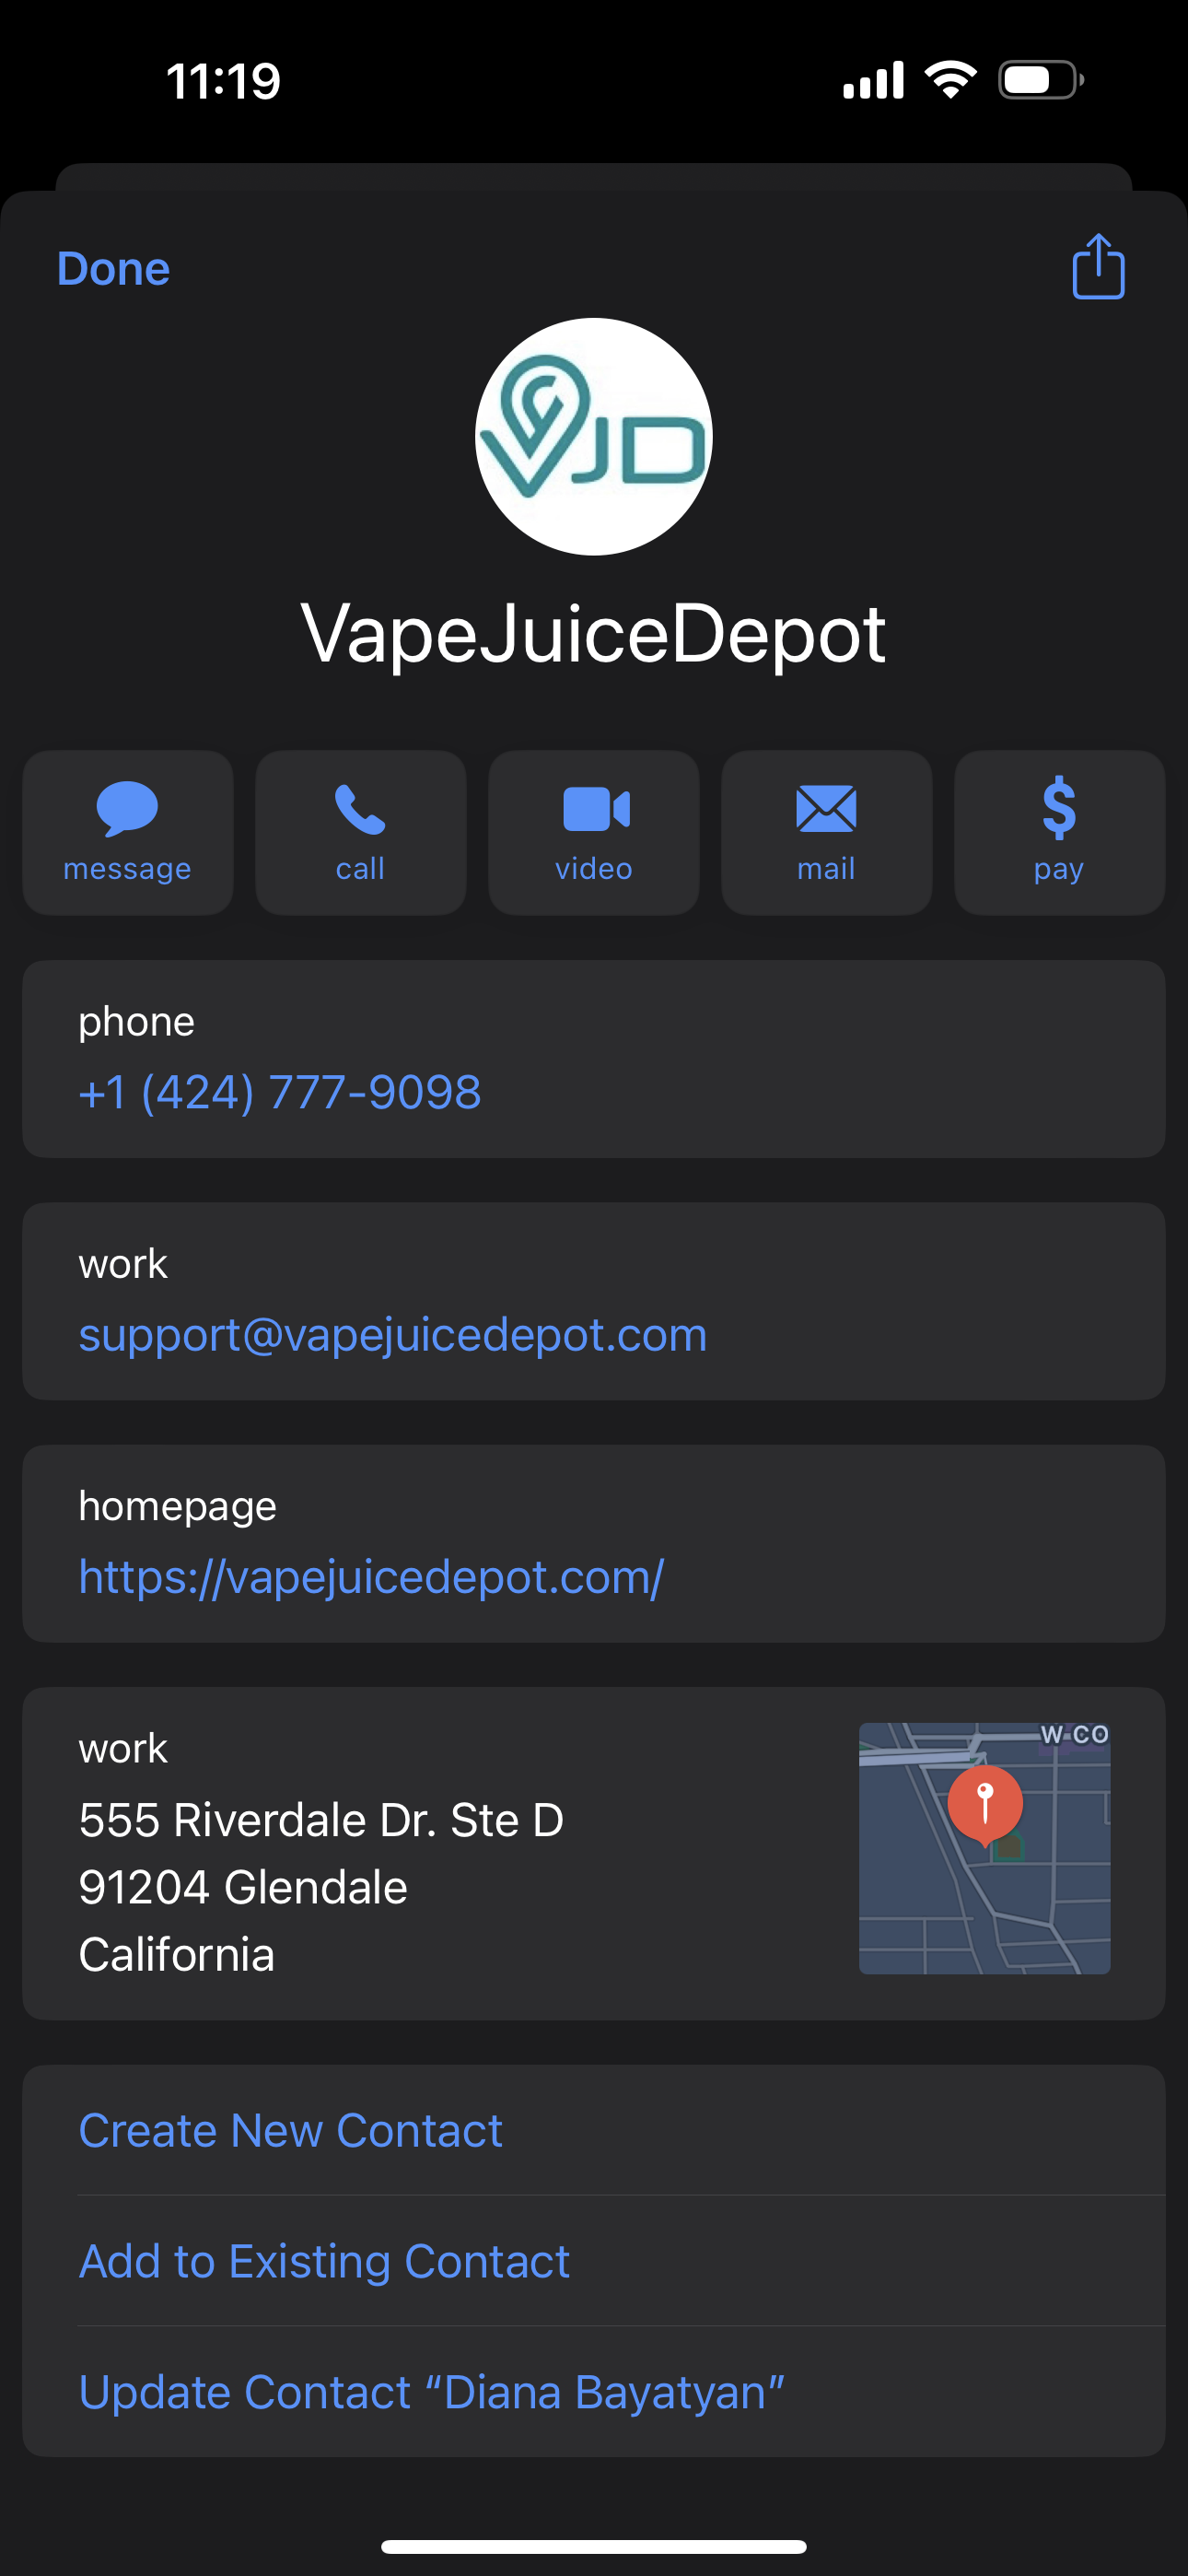 For iOS users add to contact